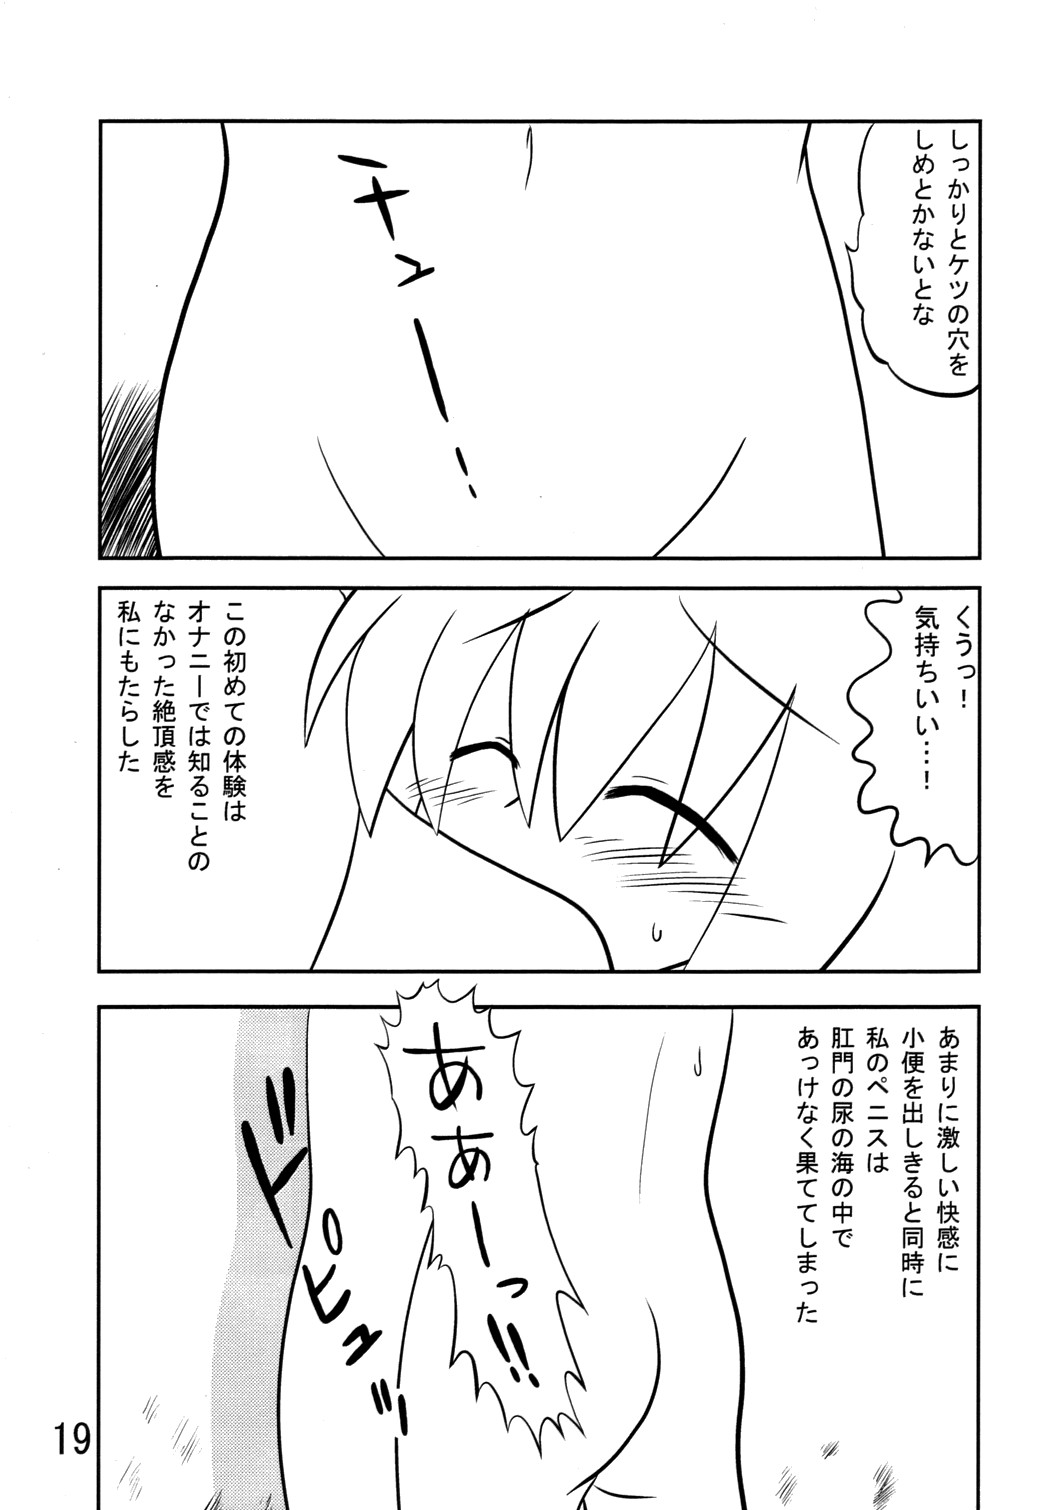 (Comic Network 25) [どアホ, 悪転奏進, Forever and ever... (福岡太朗, 英戦, 黒糖ニッケ)] くそみそルナティック (東方Project)